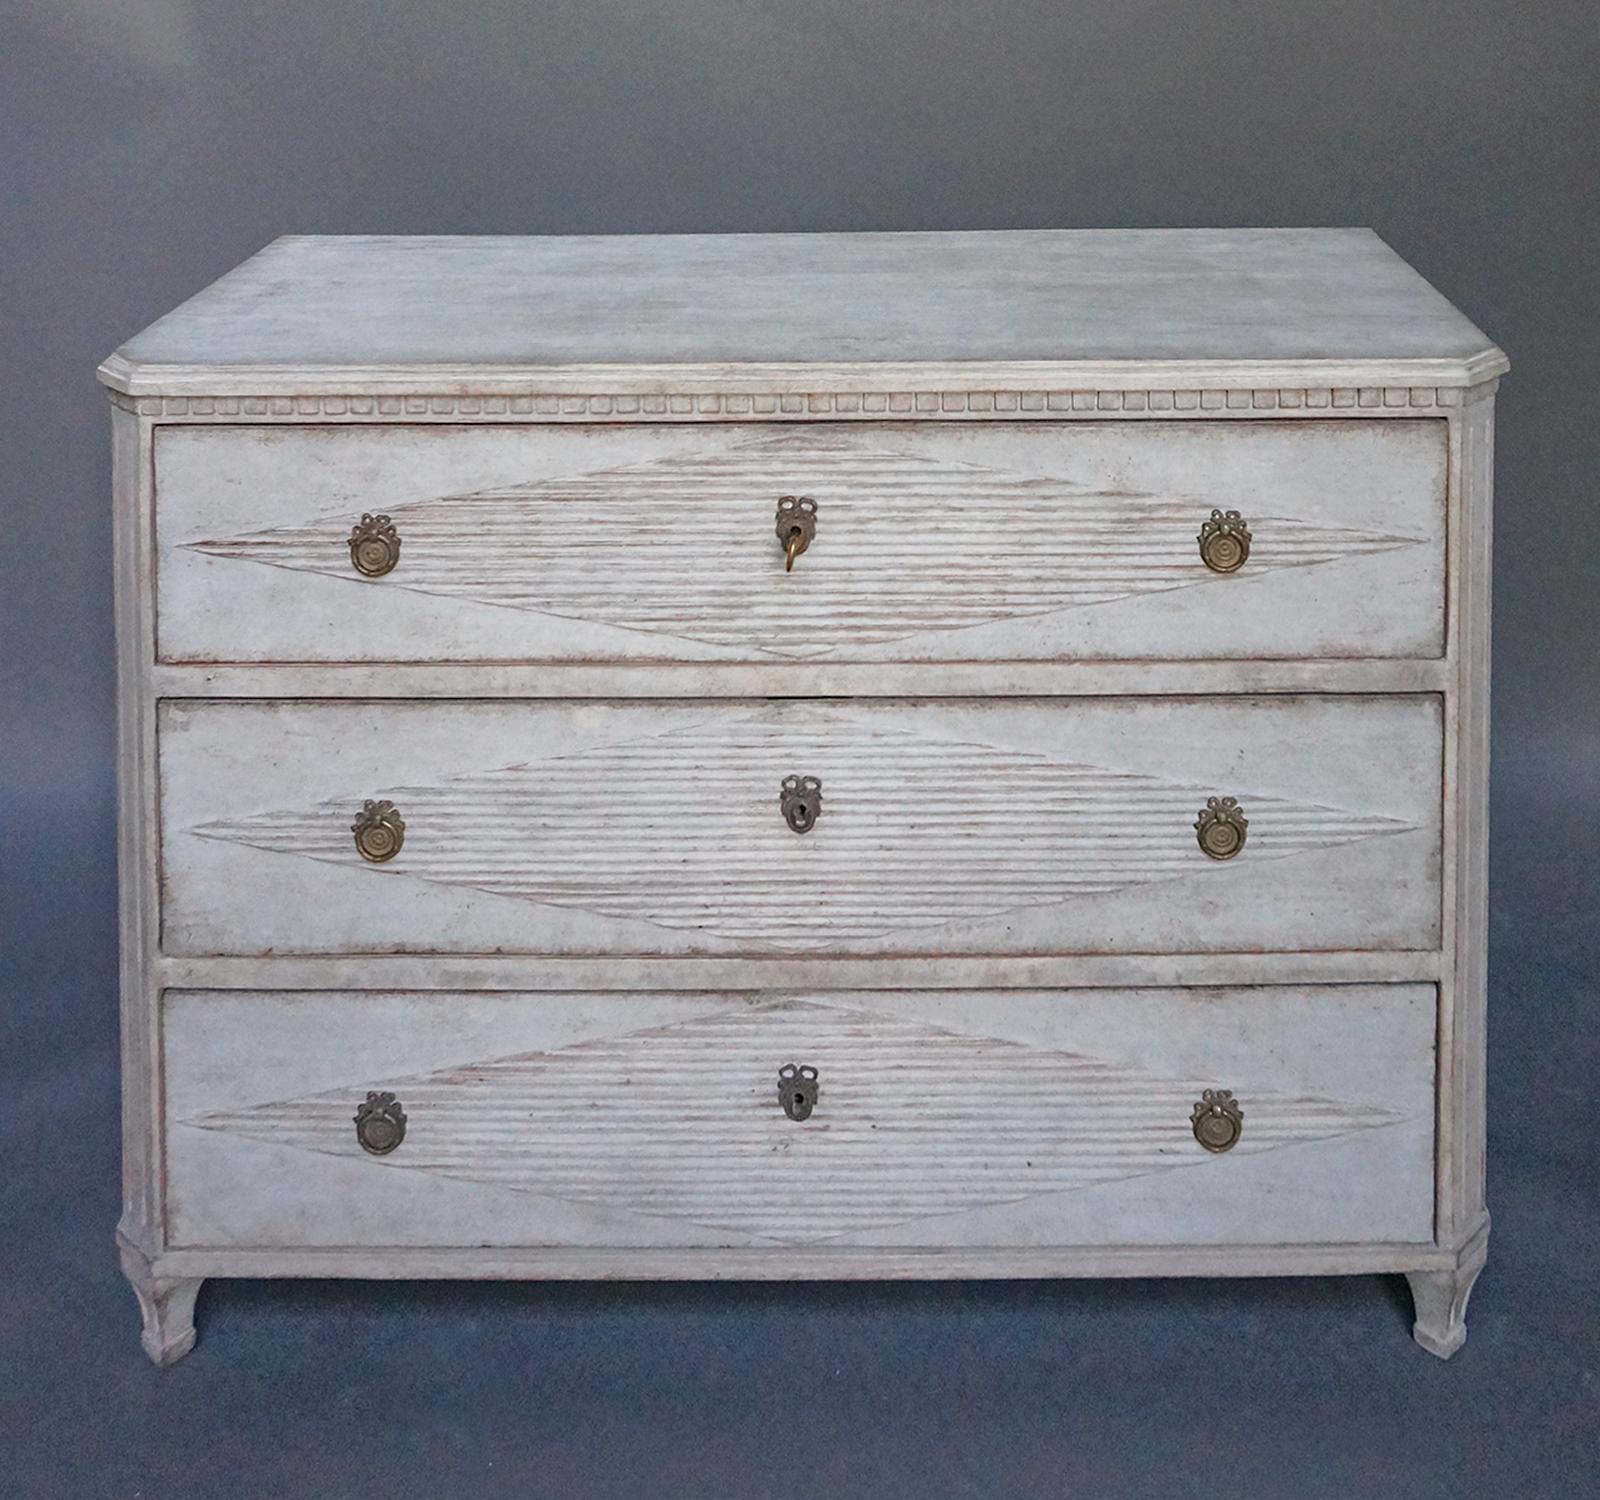 Chest of drawers in the Gustavian style, Sweden, circa 1850, with raised lozenges on the drawer fronts. Shaped top with dentil molding, canted corners and tapering square legs. Brass pulls and escutcheons.